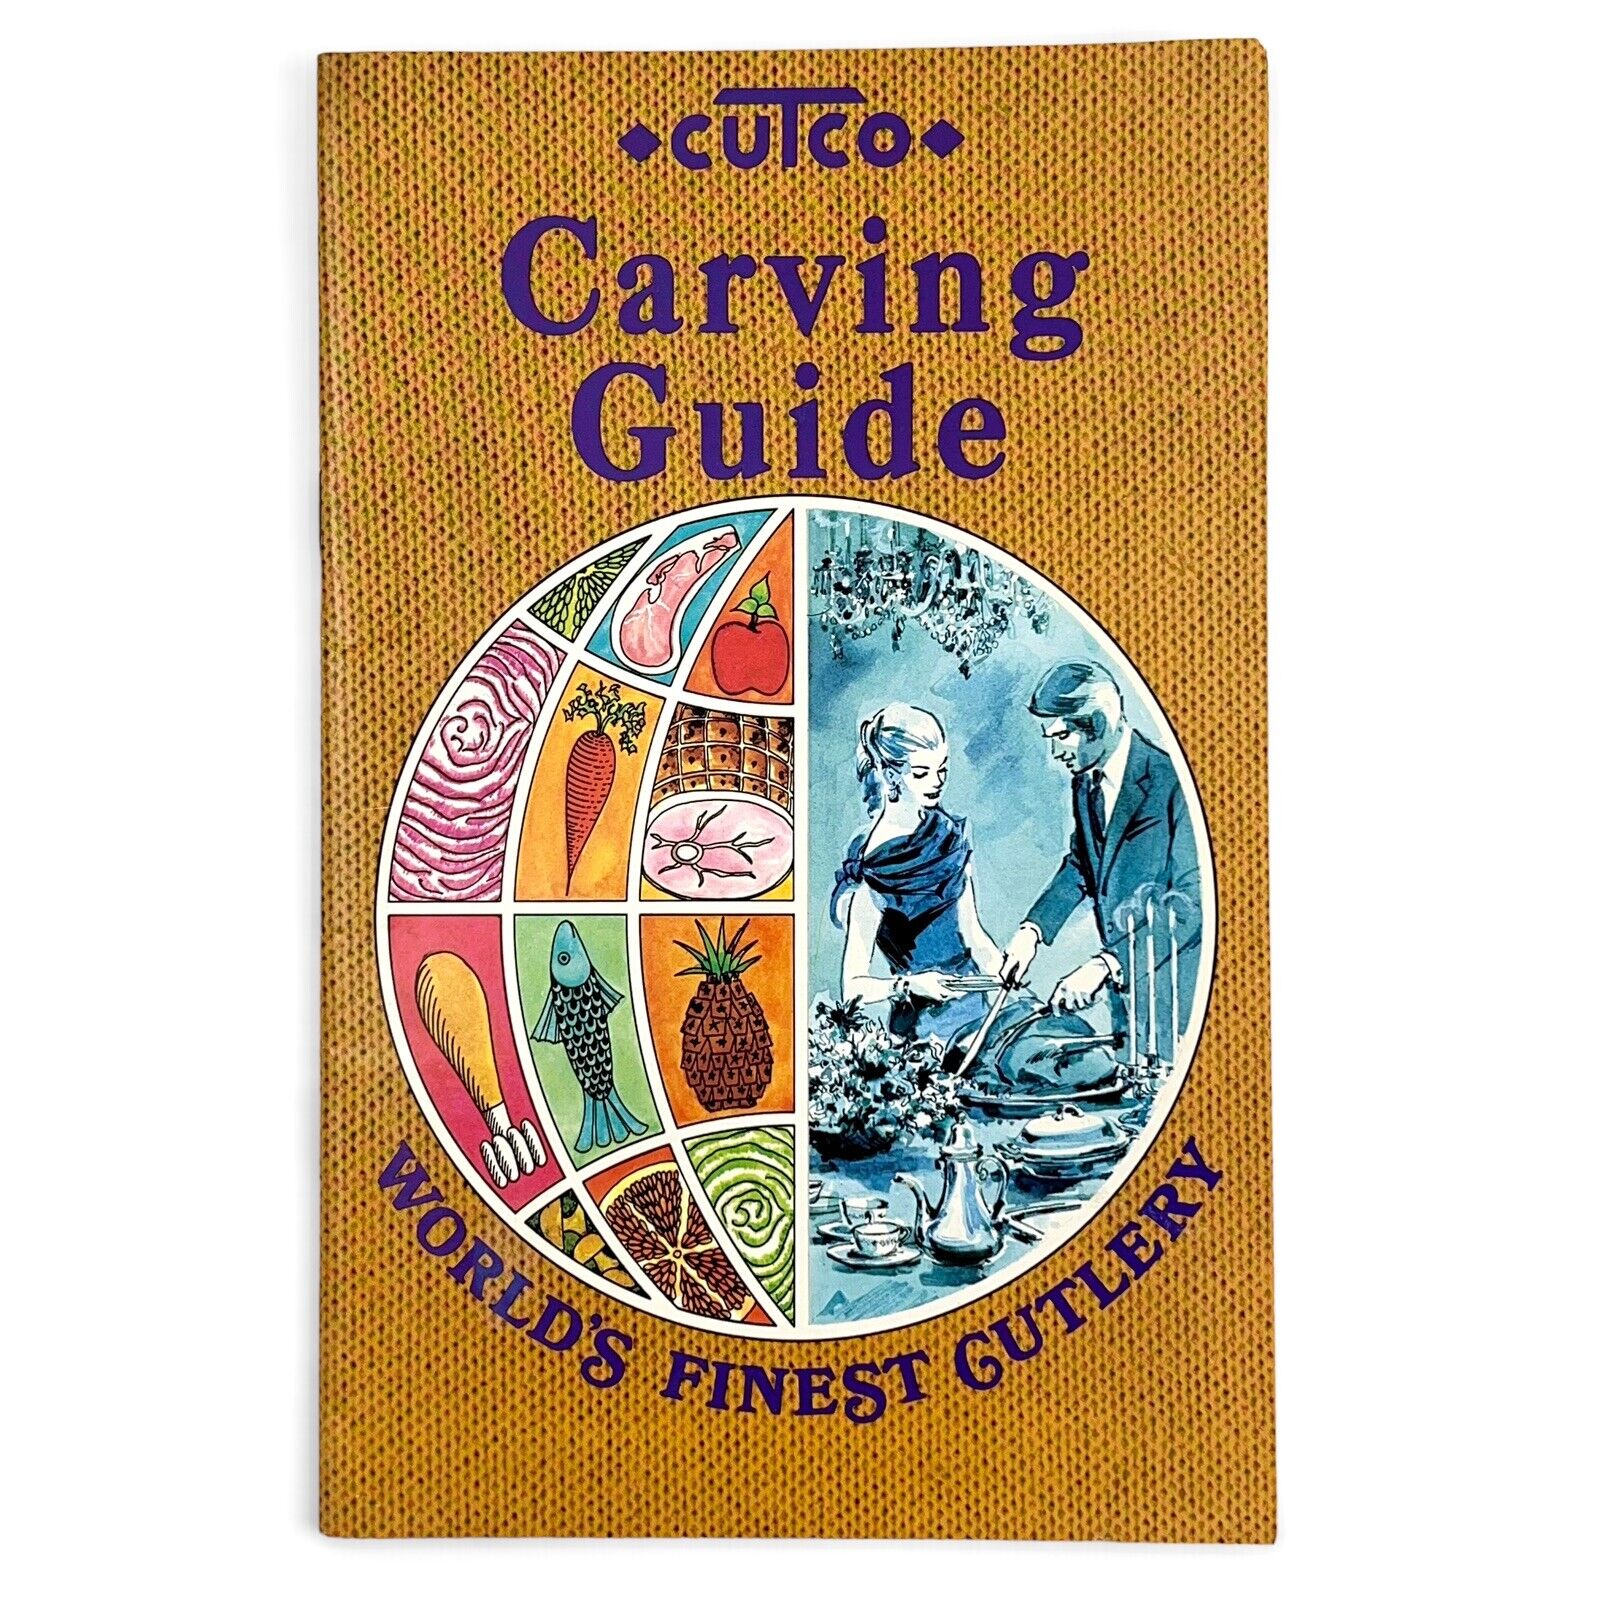 VINTAGE WEAR EVER CUTCO CARVING BOOKLET A CARVING GUIDE